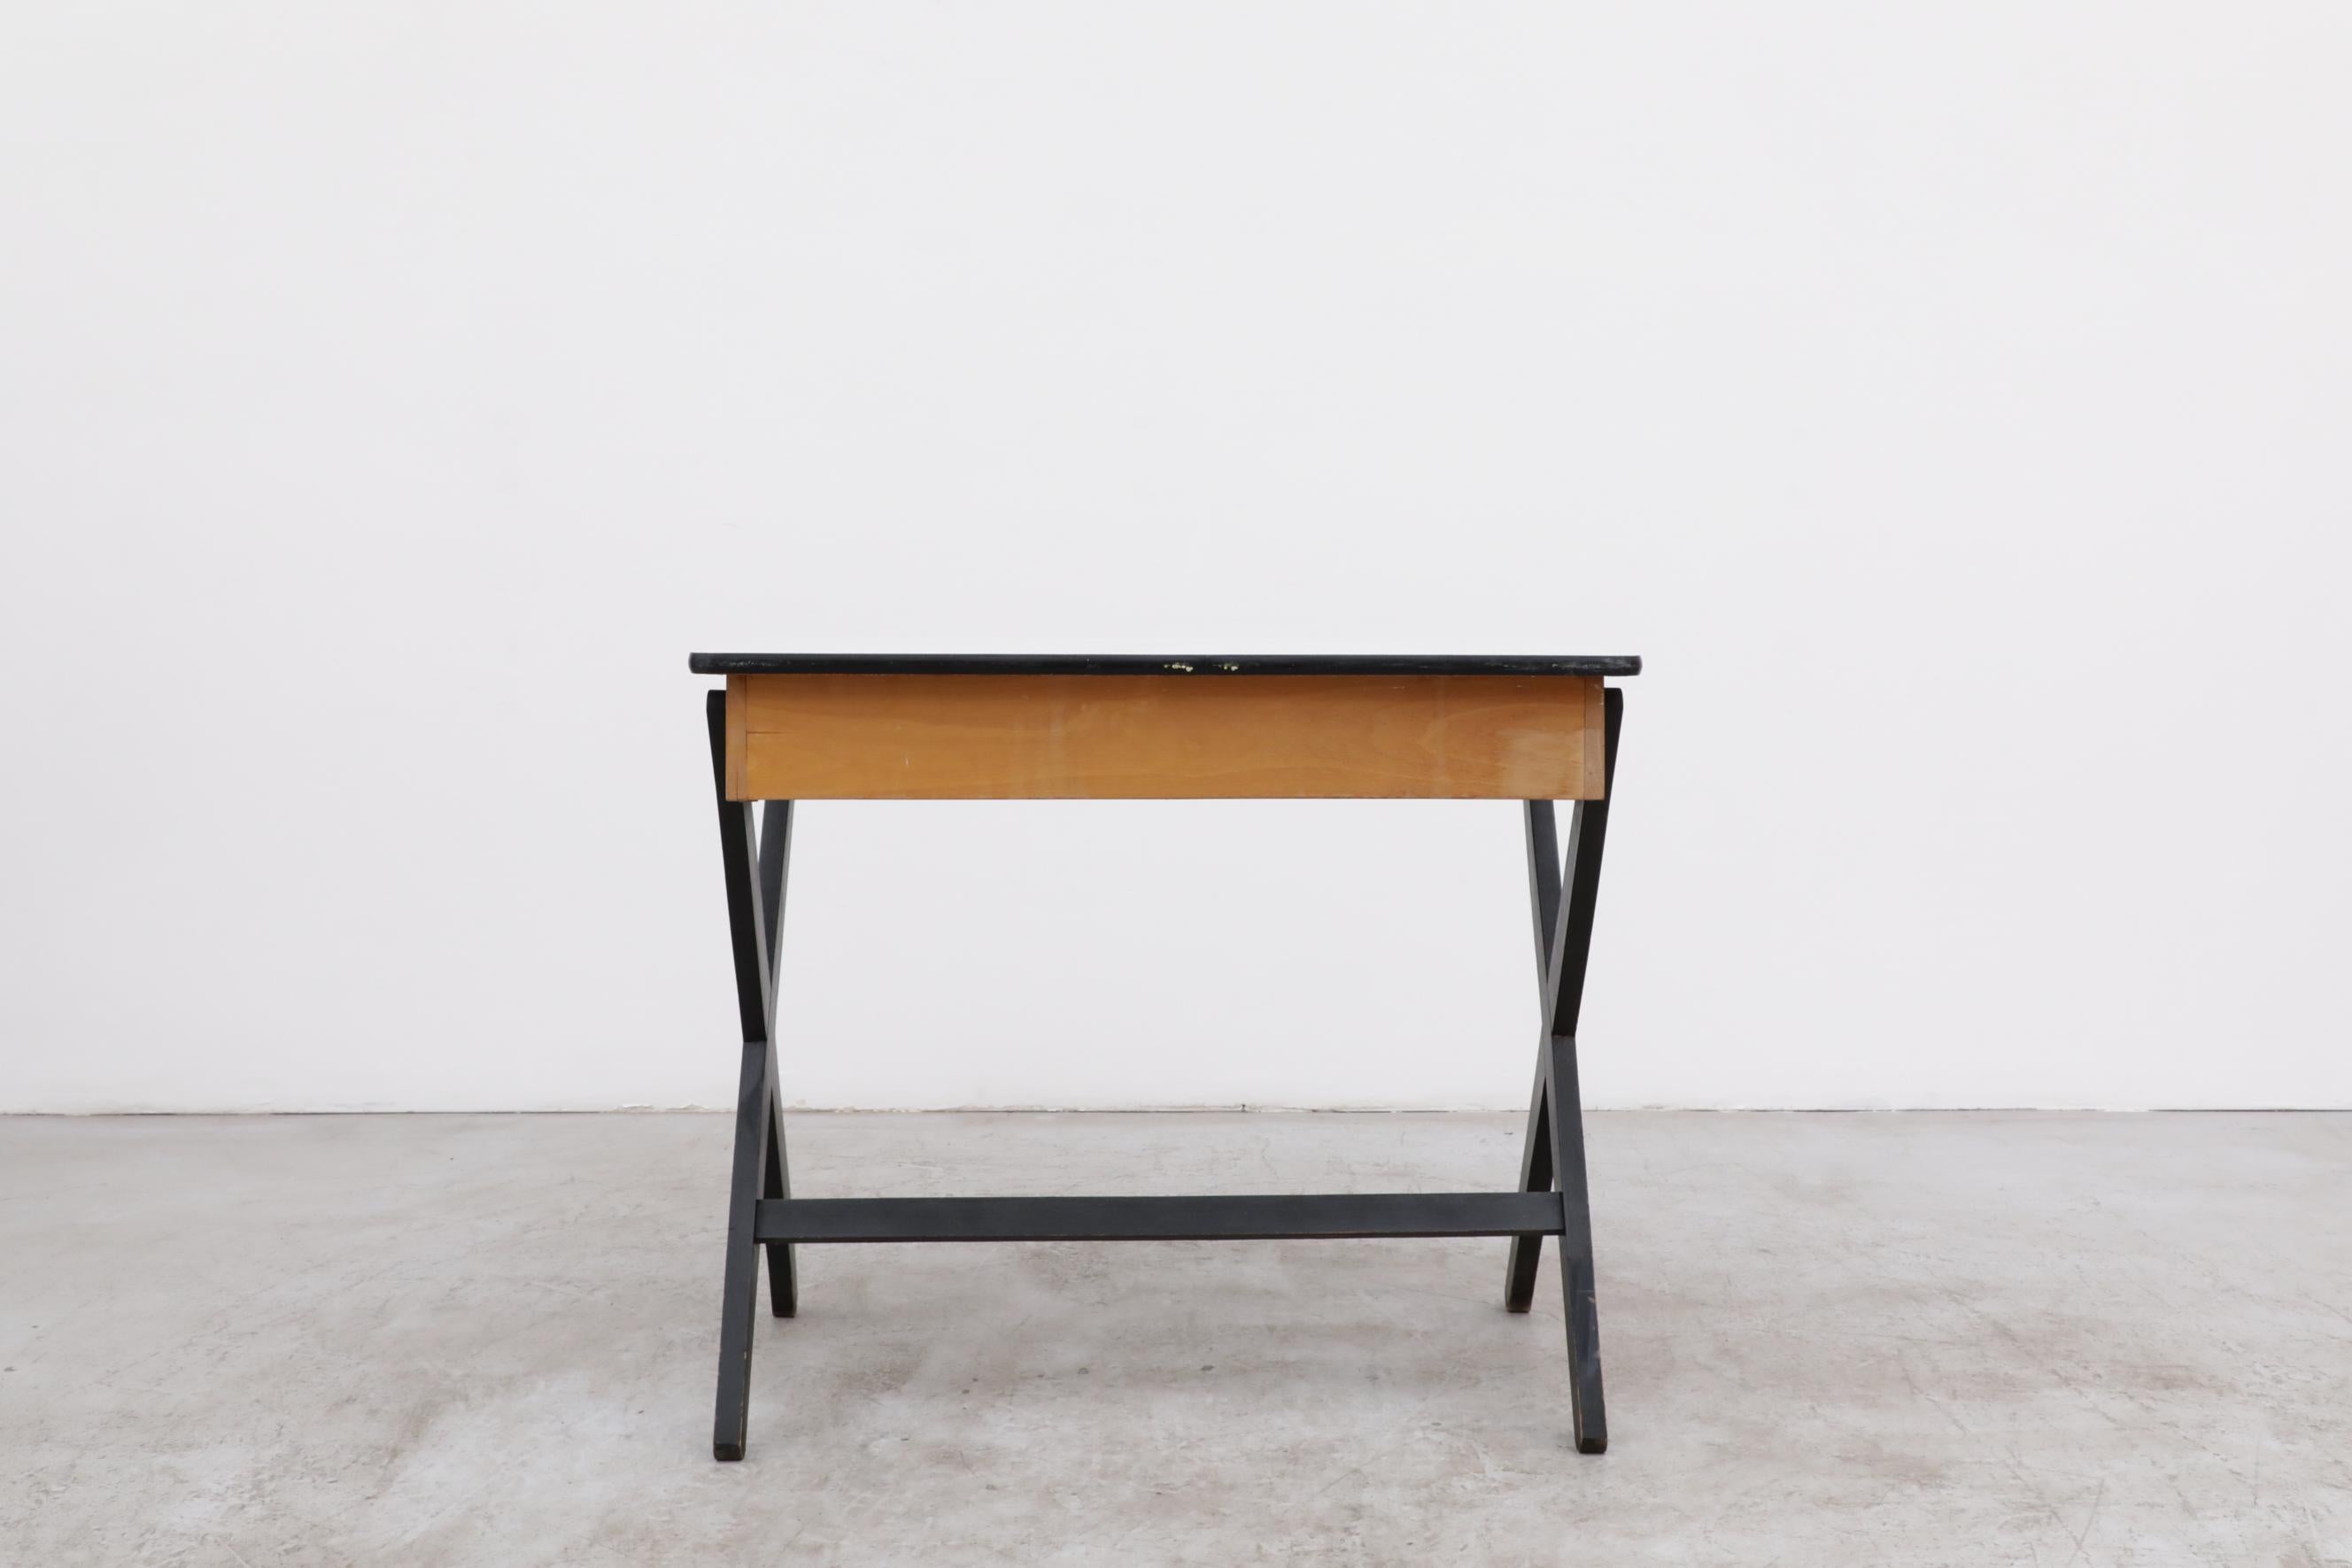 1954 Coen de Vries Desk in Birch w/ Ebony Base, Red Drawer and Formica Top For Sale 5